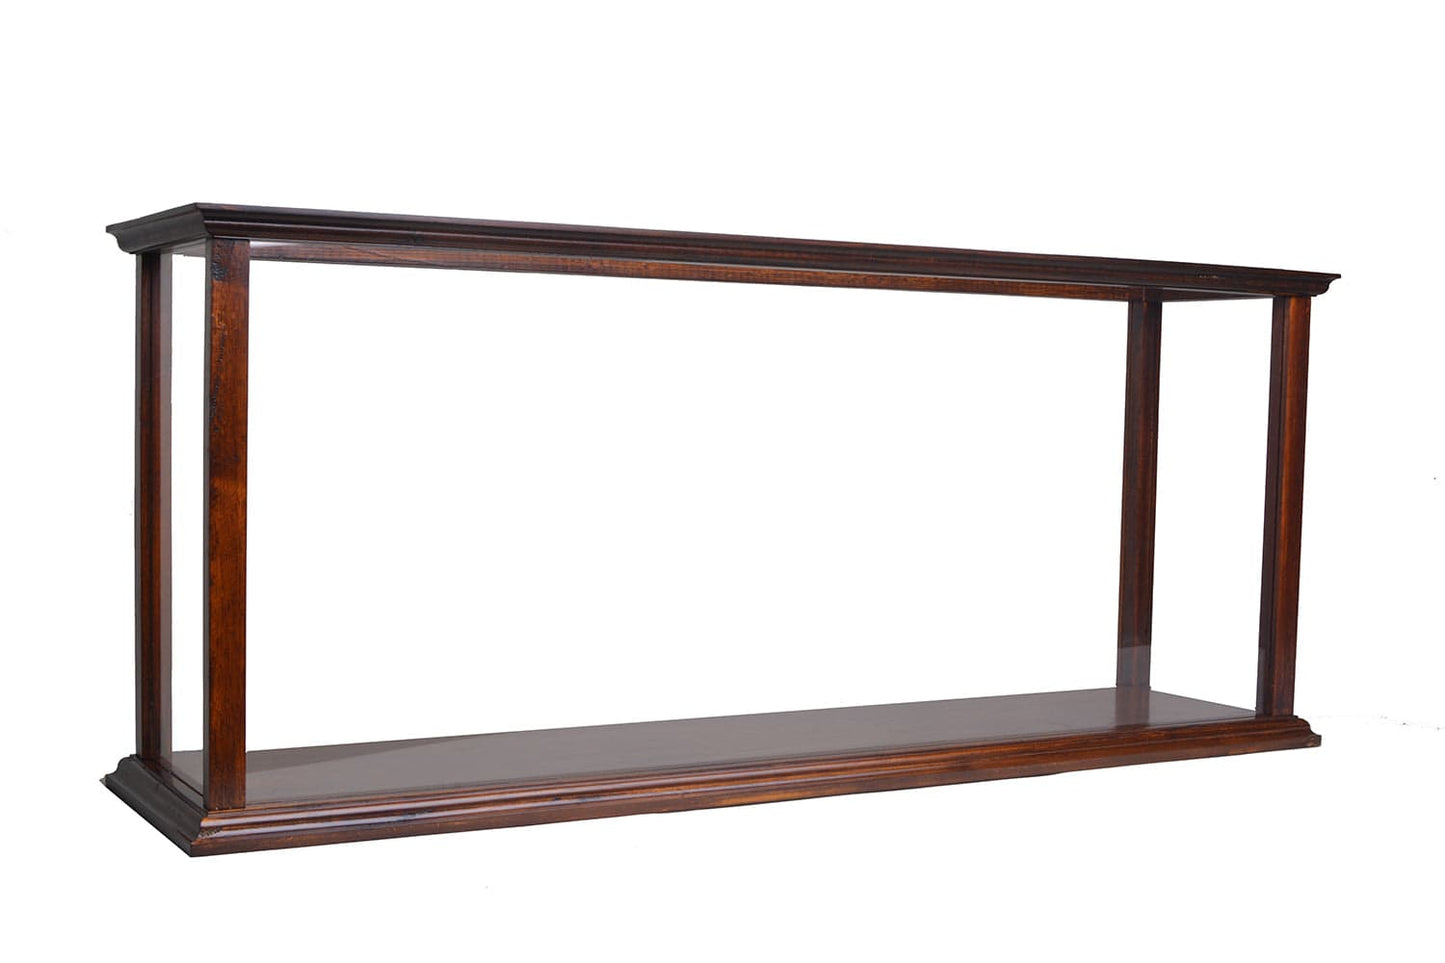 ALDO Creative Arts Collectibles Scale Model Outside: L: 38.5 W: 9.5 H: 16 Inches   Inside: 35.5 L x 7 1/8 W x 13.5 H inches / NEW / Wood with plexiglass panels Display Case Wood Table Top Cabinet  Classic Brown For Midsize Cruise Liners and  Boat Models With Plexiglass Panels